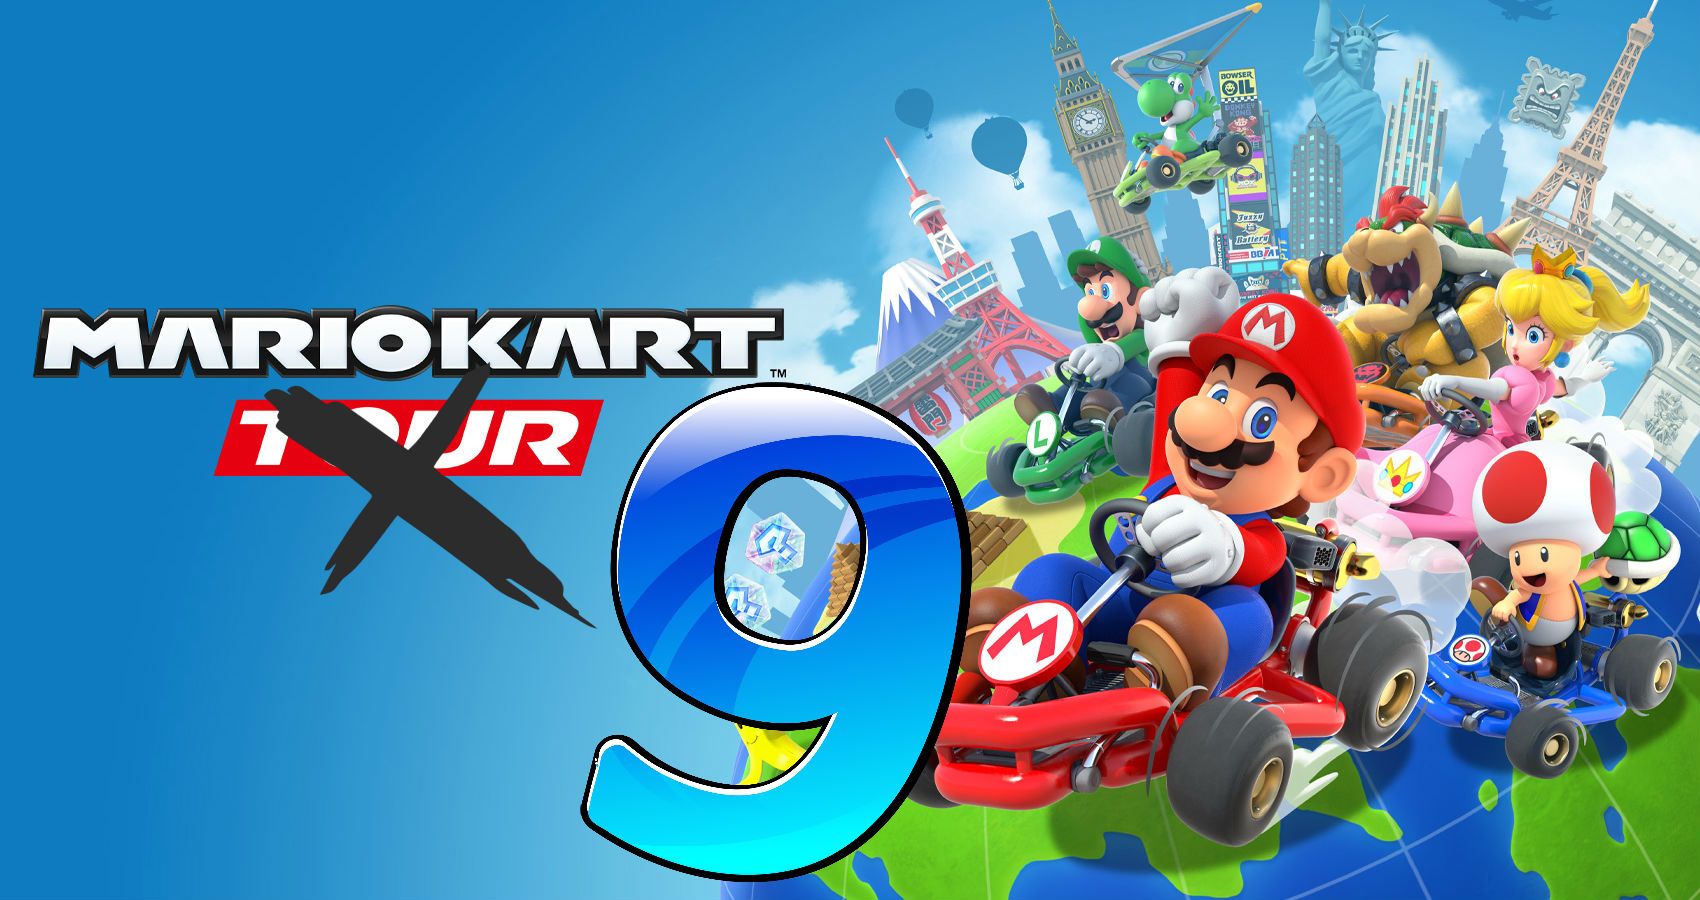 is mario kart 9 coming out